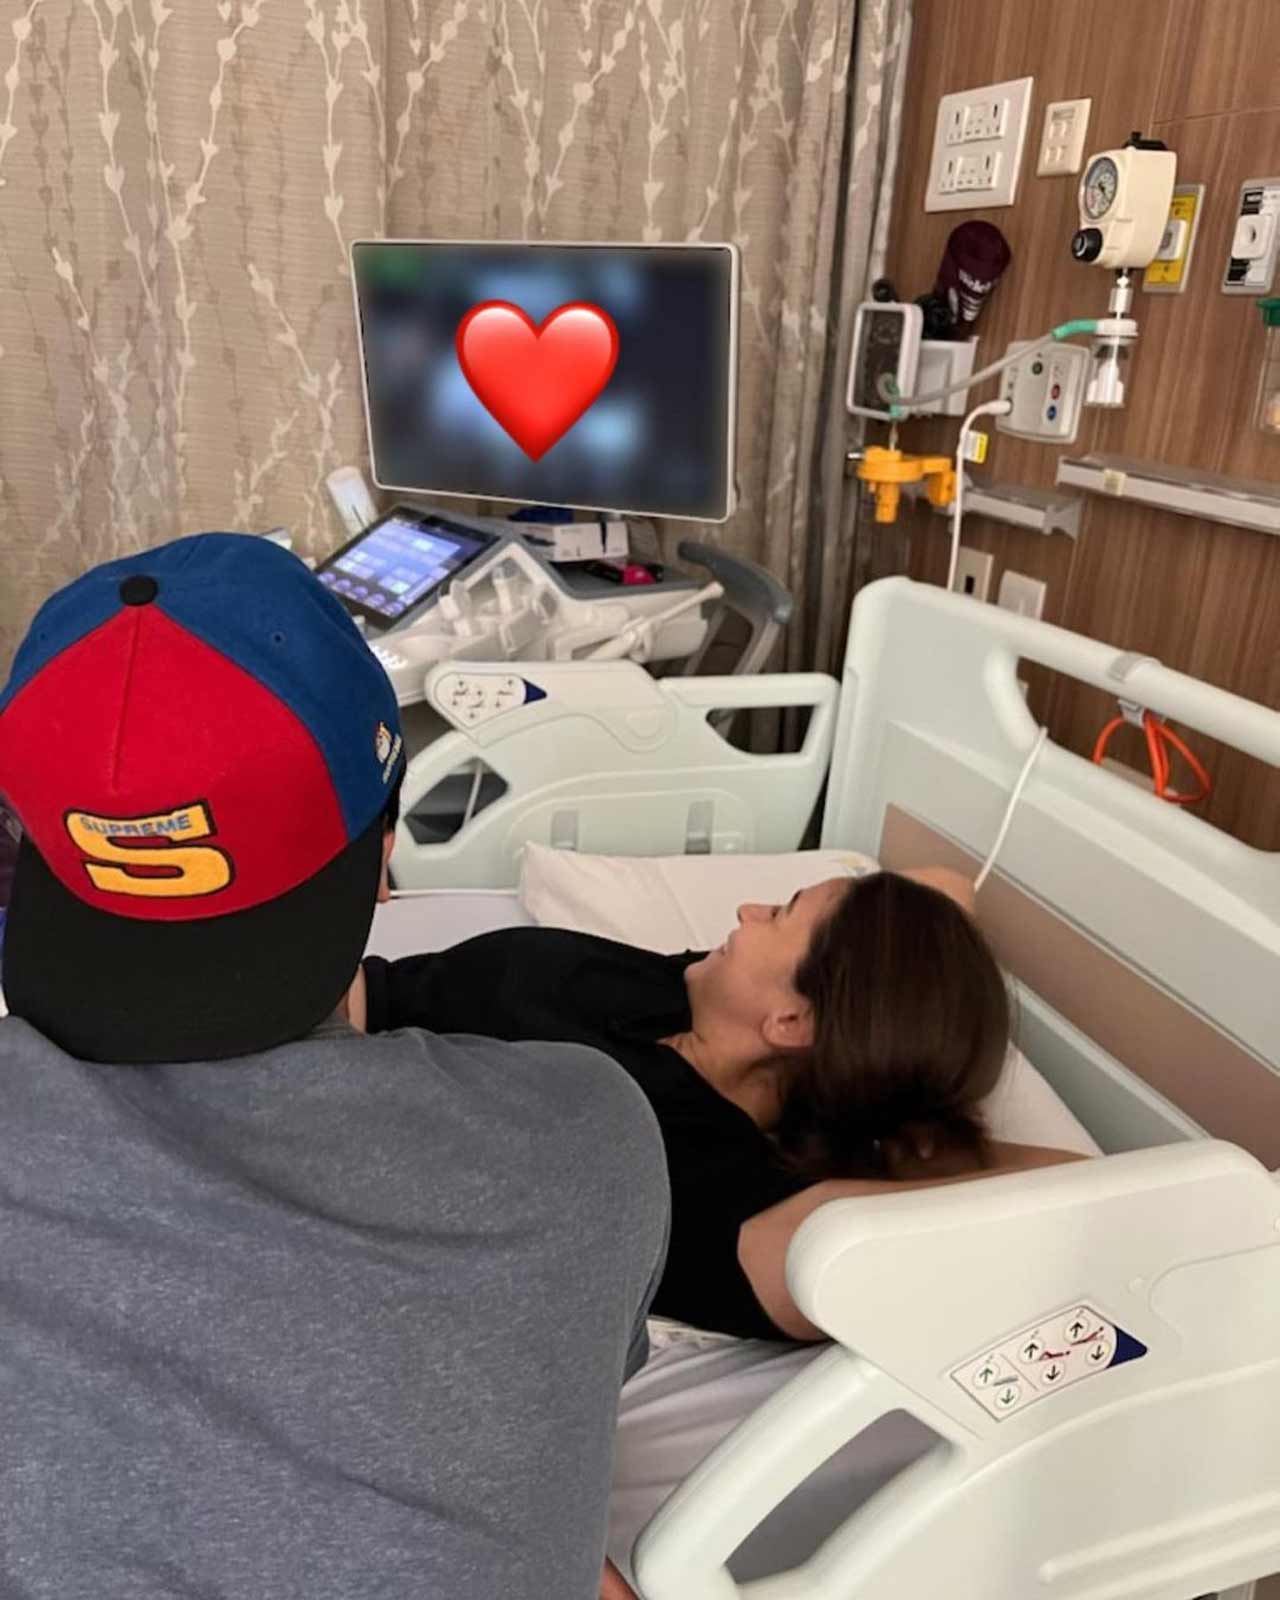 Alia Bhatt shared a picture, where the actress is seen getting her sonography done while her husband Ranbir is seen looking at the baby on the screen. She captioned the image: 